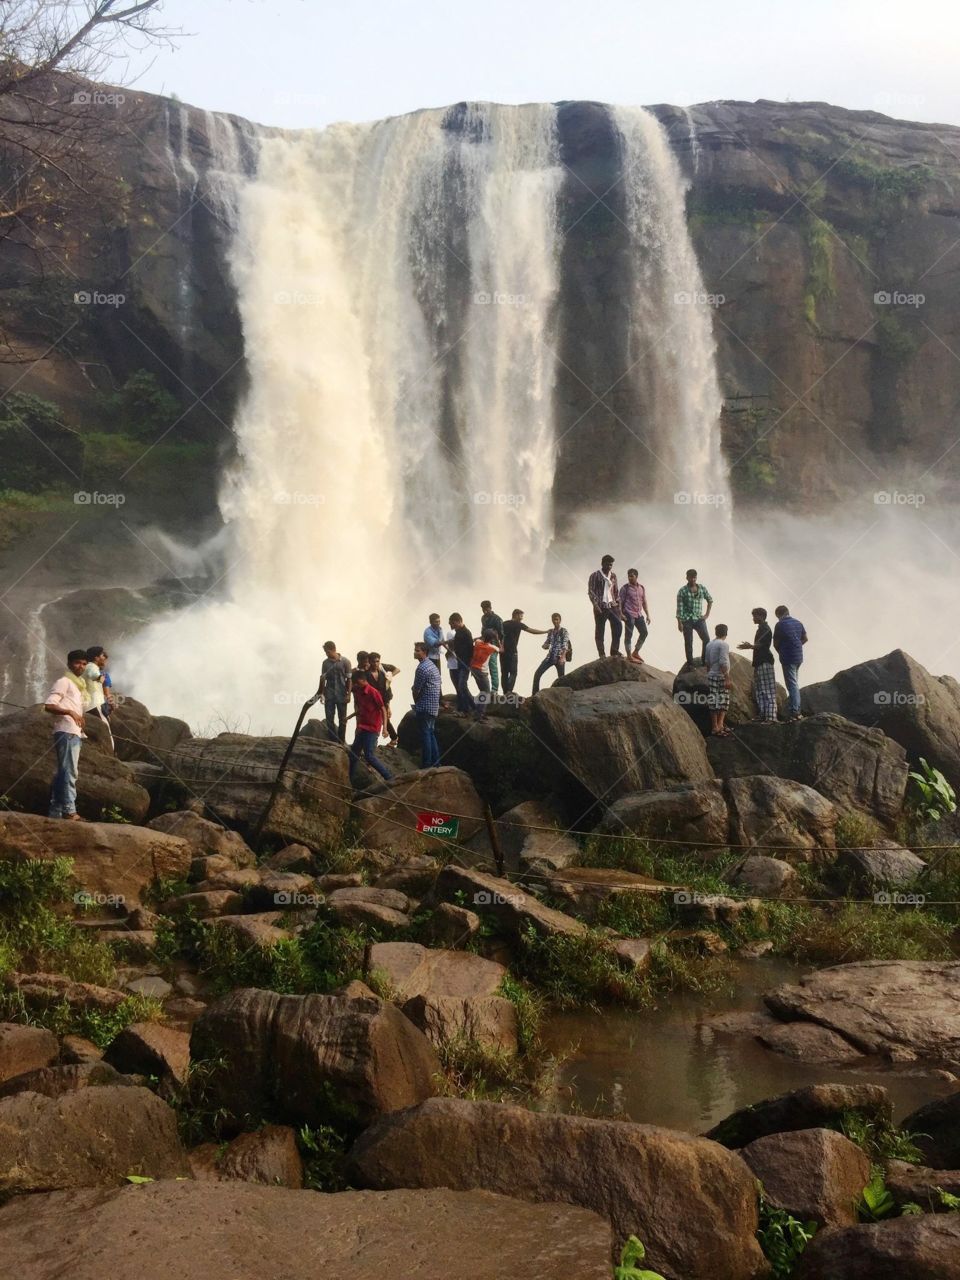 Falls..when in india..